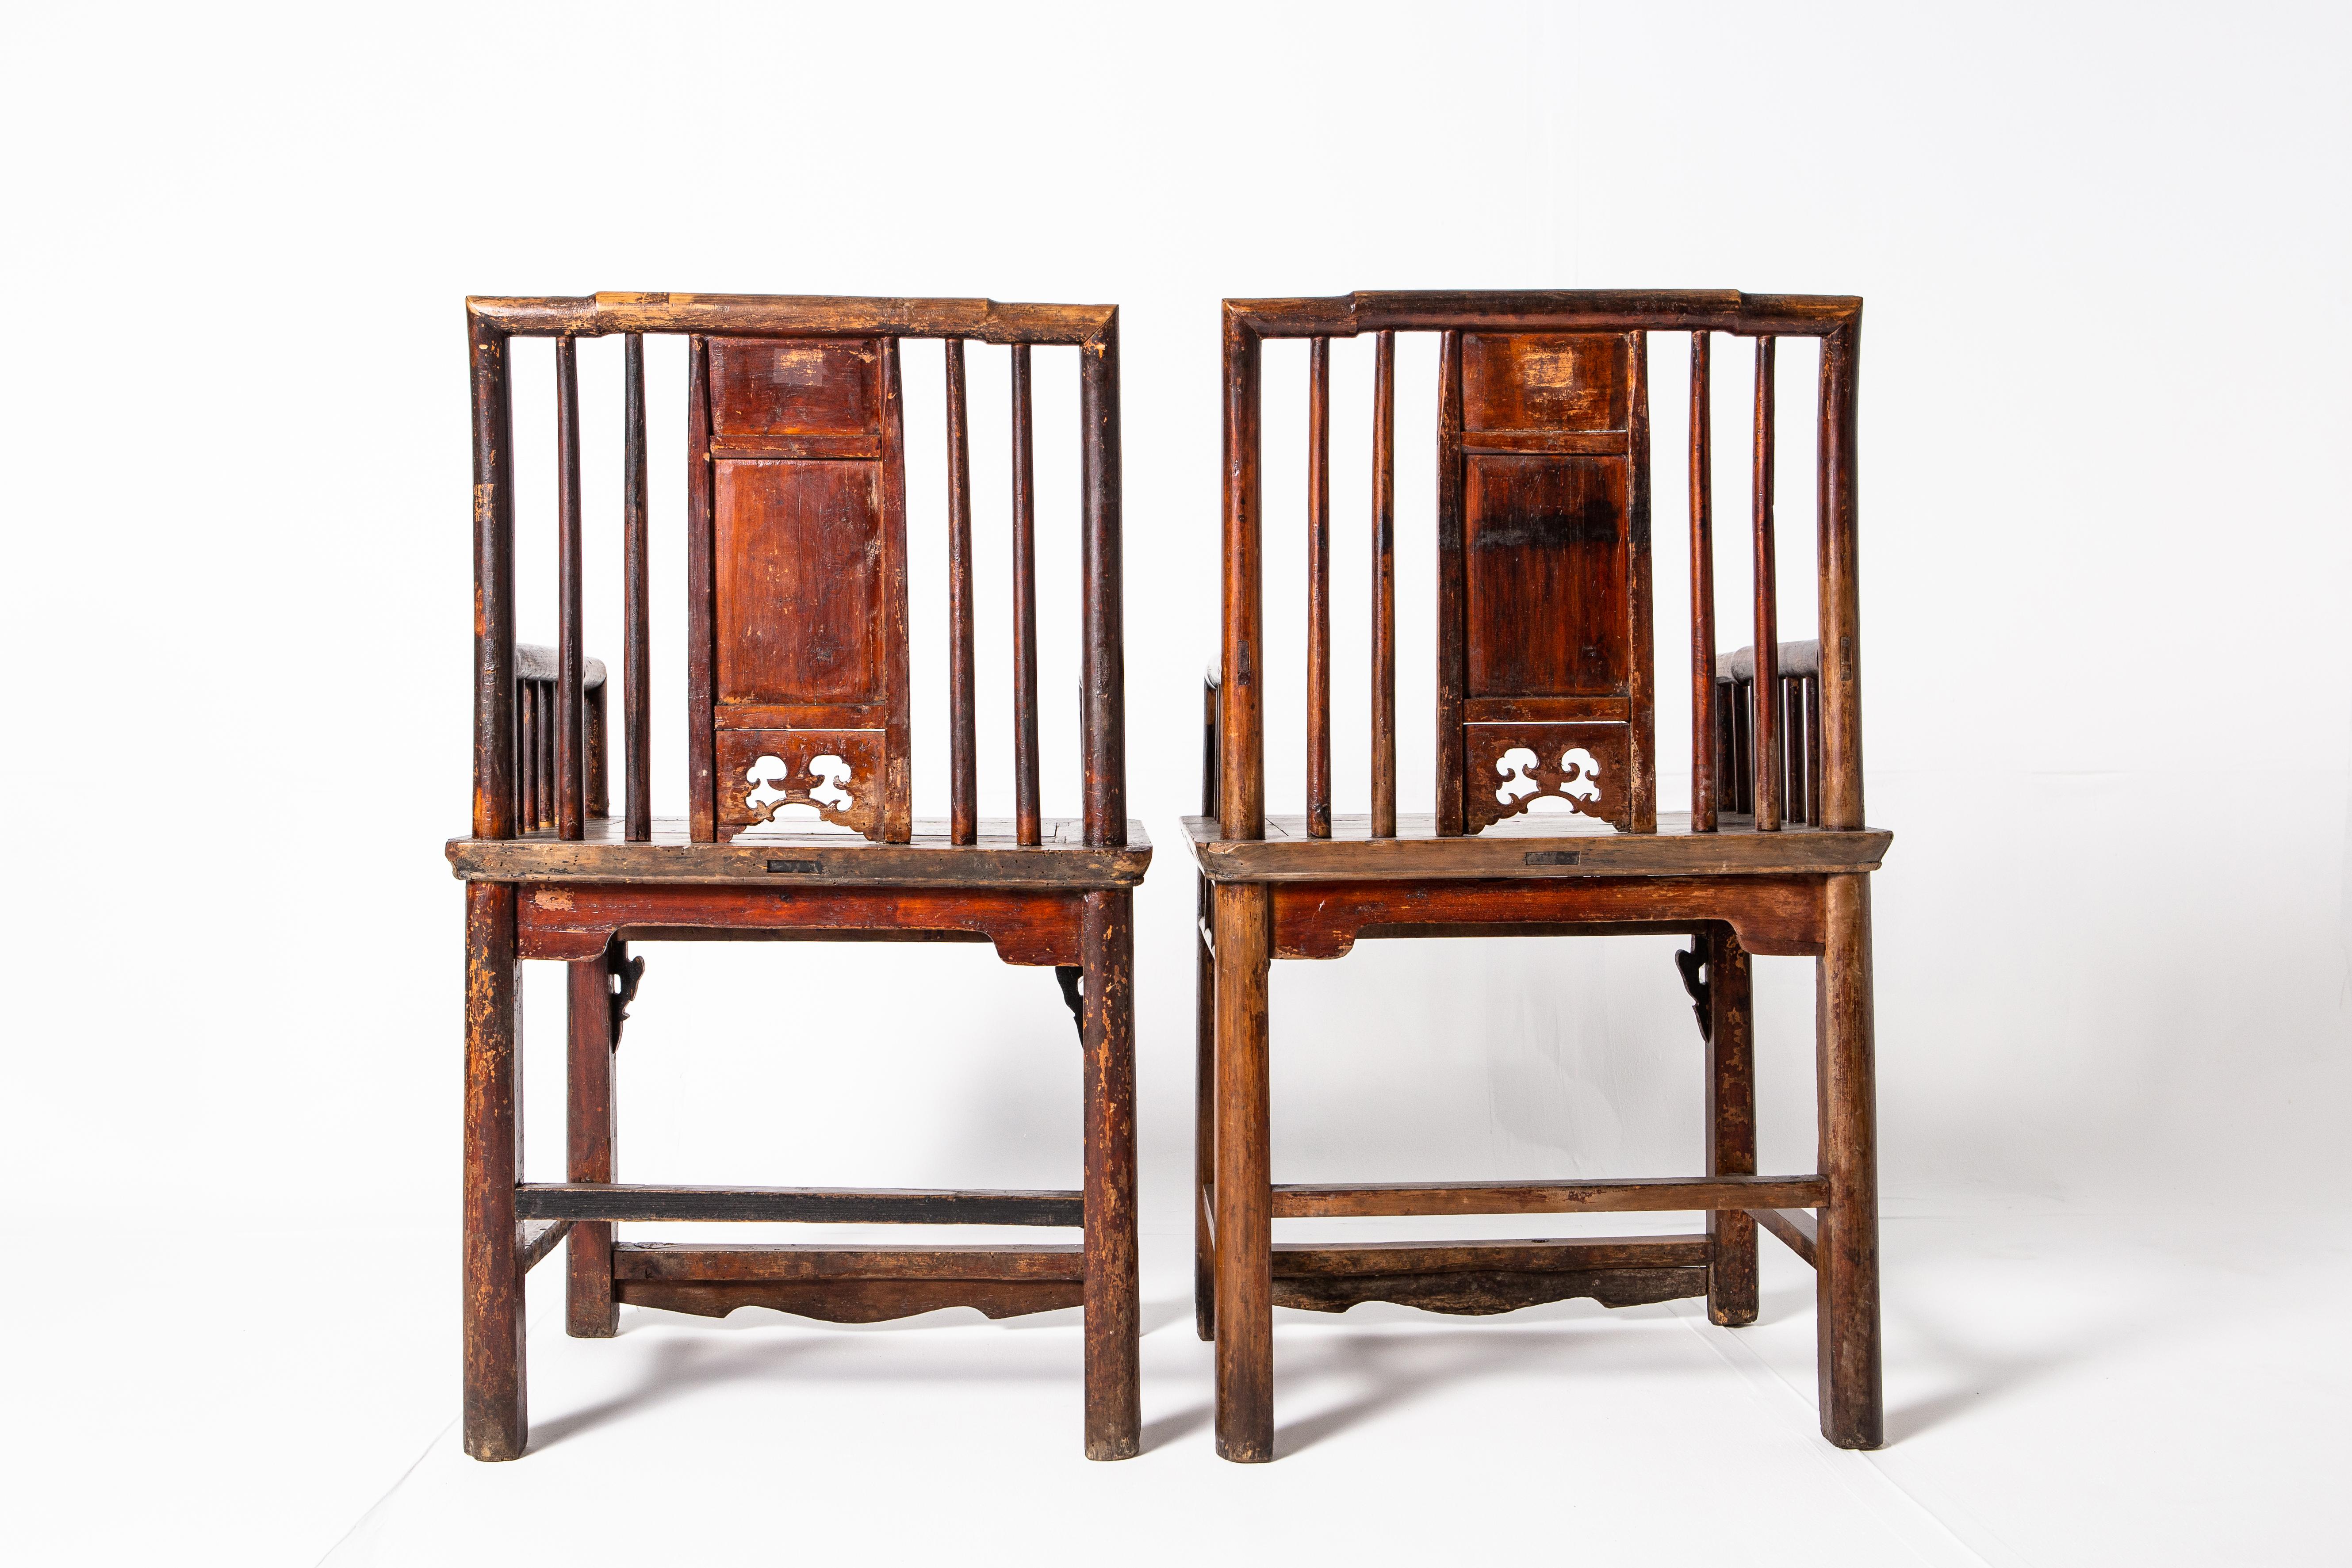 When chairs have non-protruding crest rails and arms that do not extend beyond the front post, they are known as southern official’s hat chairs or writing chairs. It is believed that this style of chair originated in Jiangsu province, hence the term